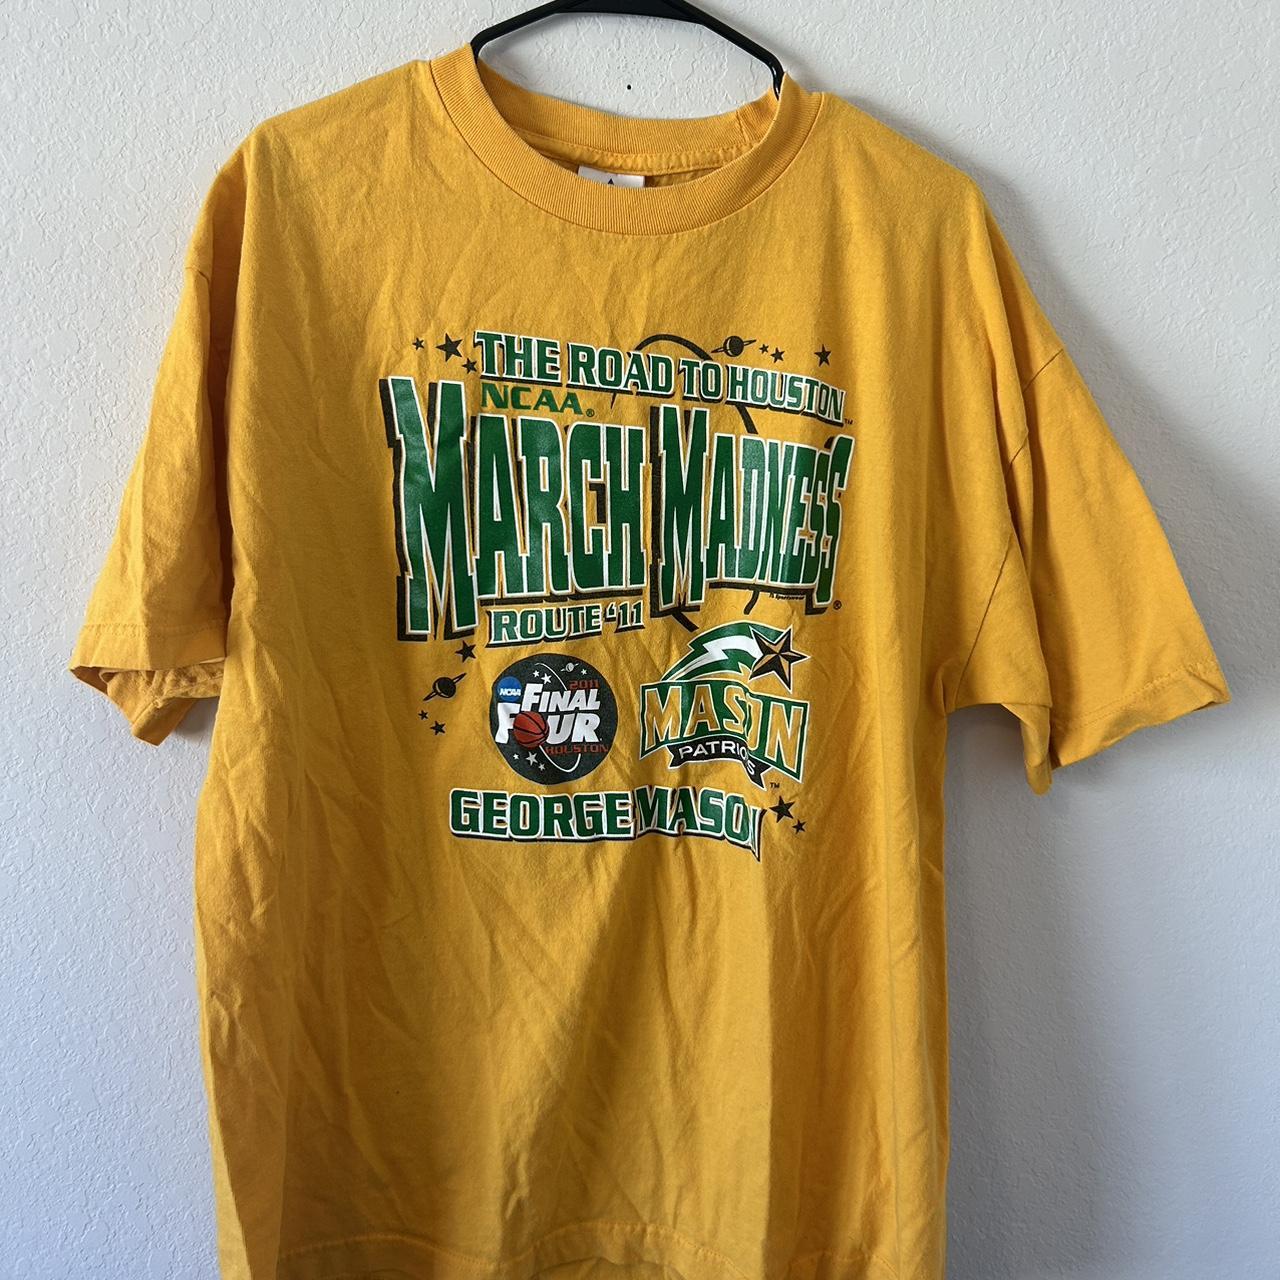 Vintage March madness tee shirt 2011 Size XL - Depop